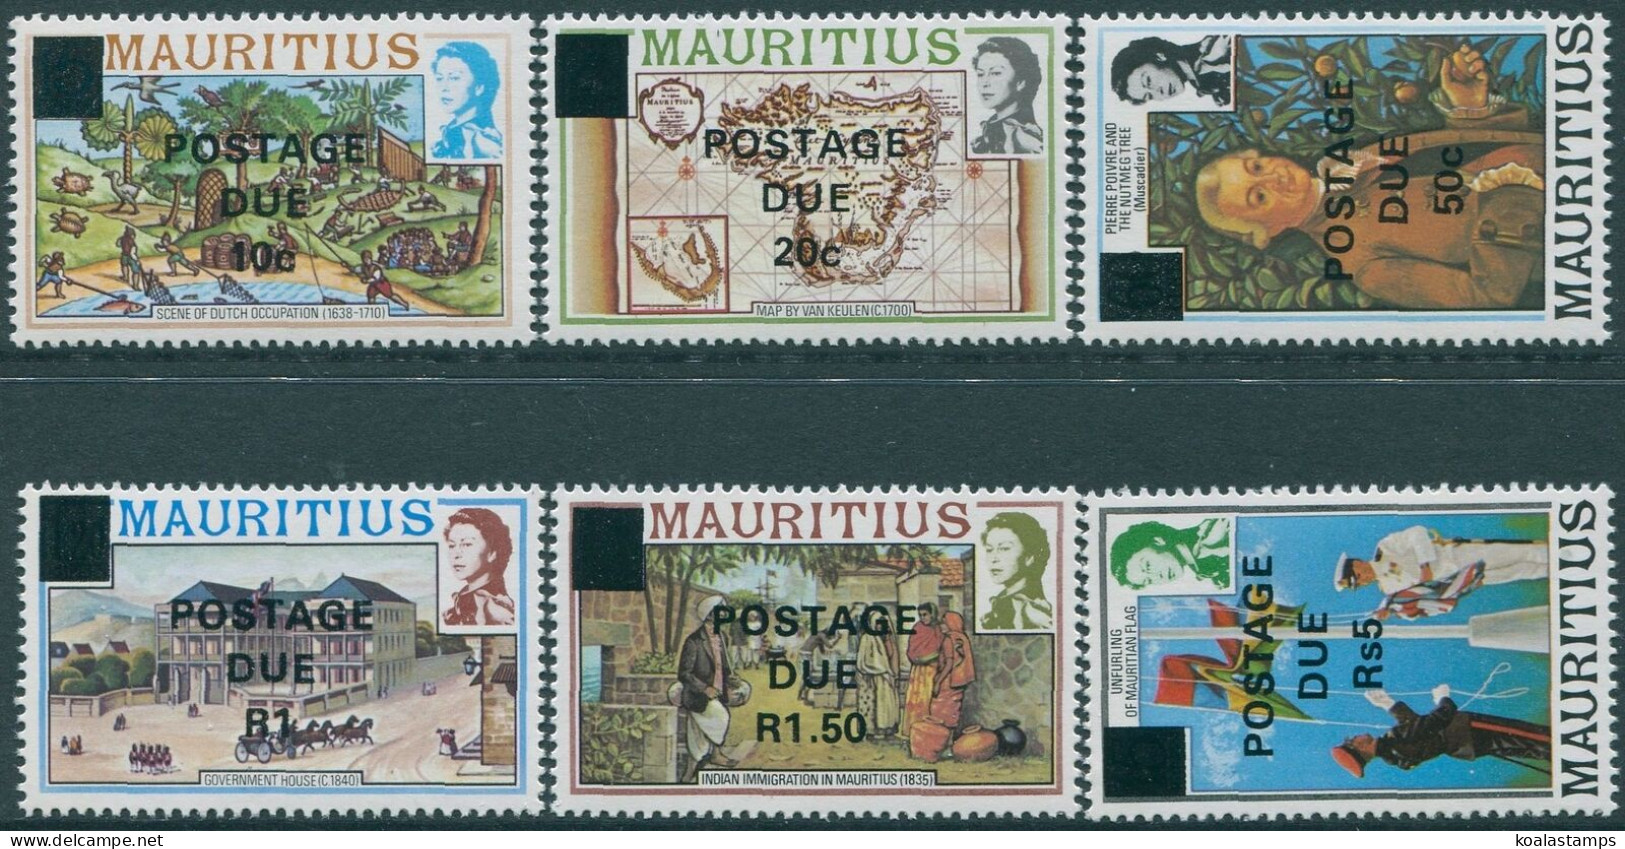 Mauritius Due 1982 SGD14-D19 Postage Dues Set MNH - Maurice (1968-...)